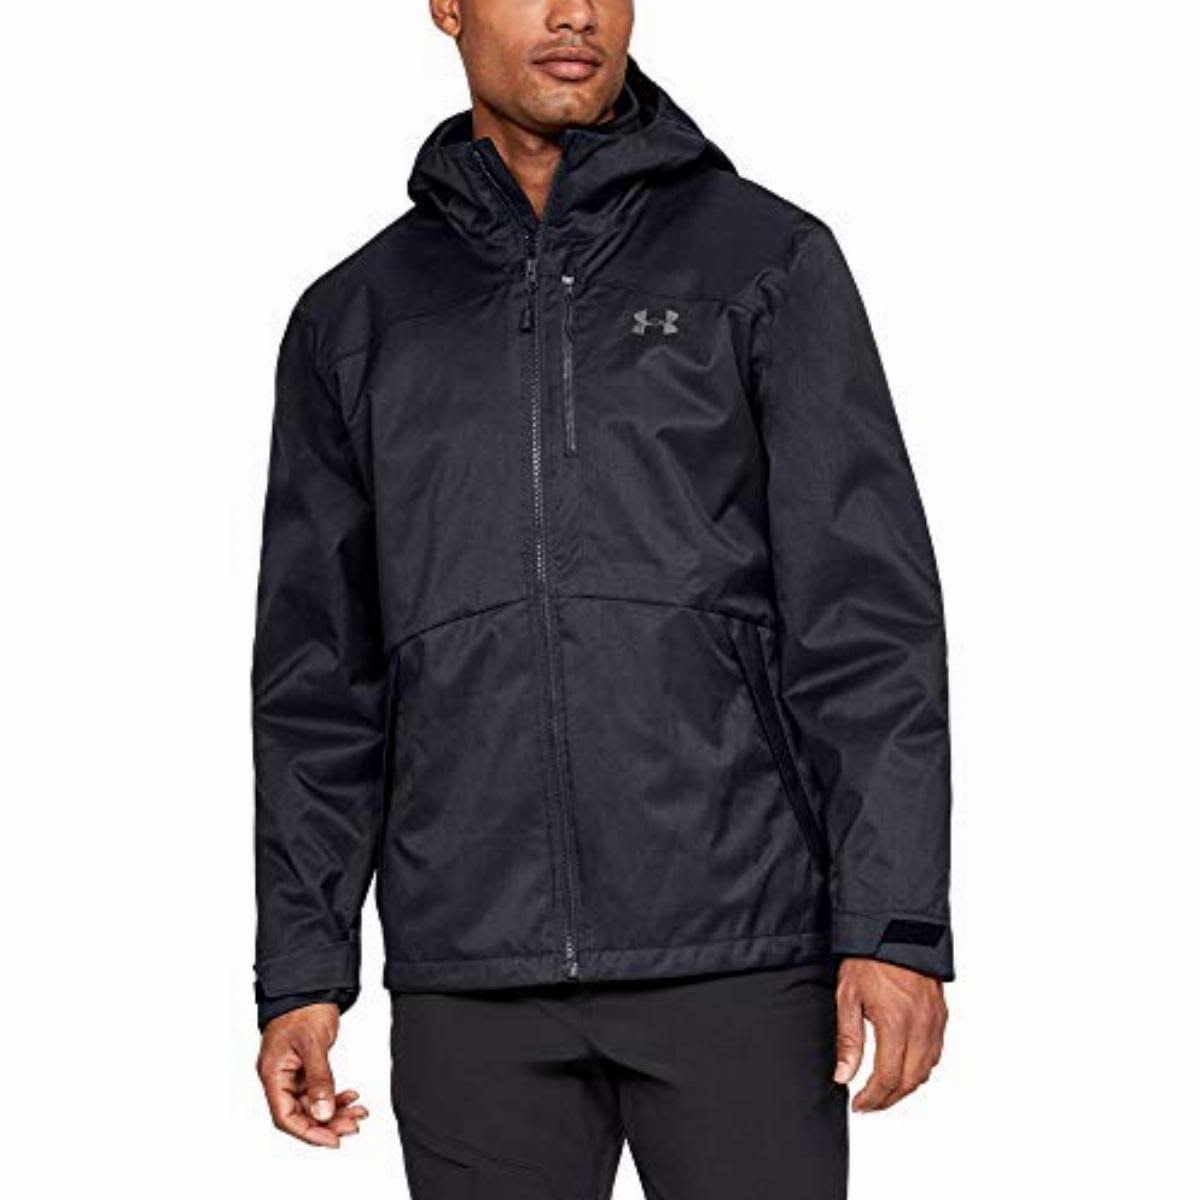 Under Armour Men's Porter 3-in-1 Jacket , Black (001)/Charcoal , Small